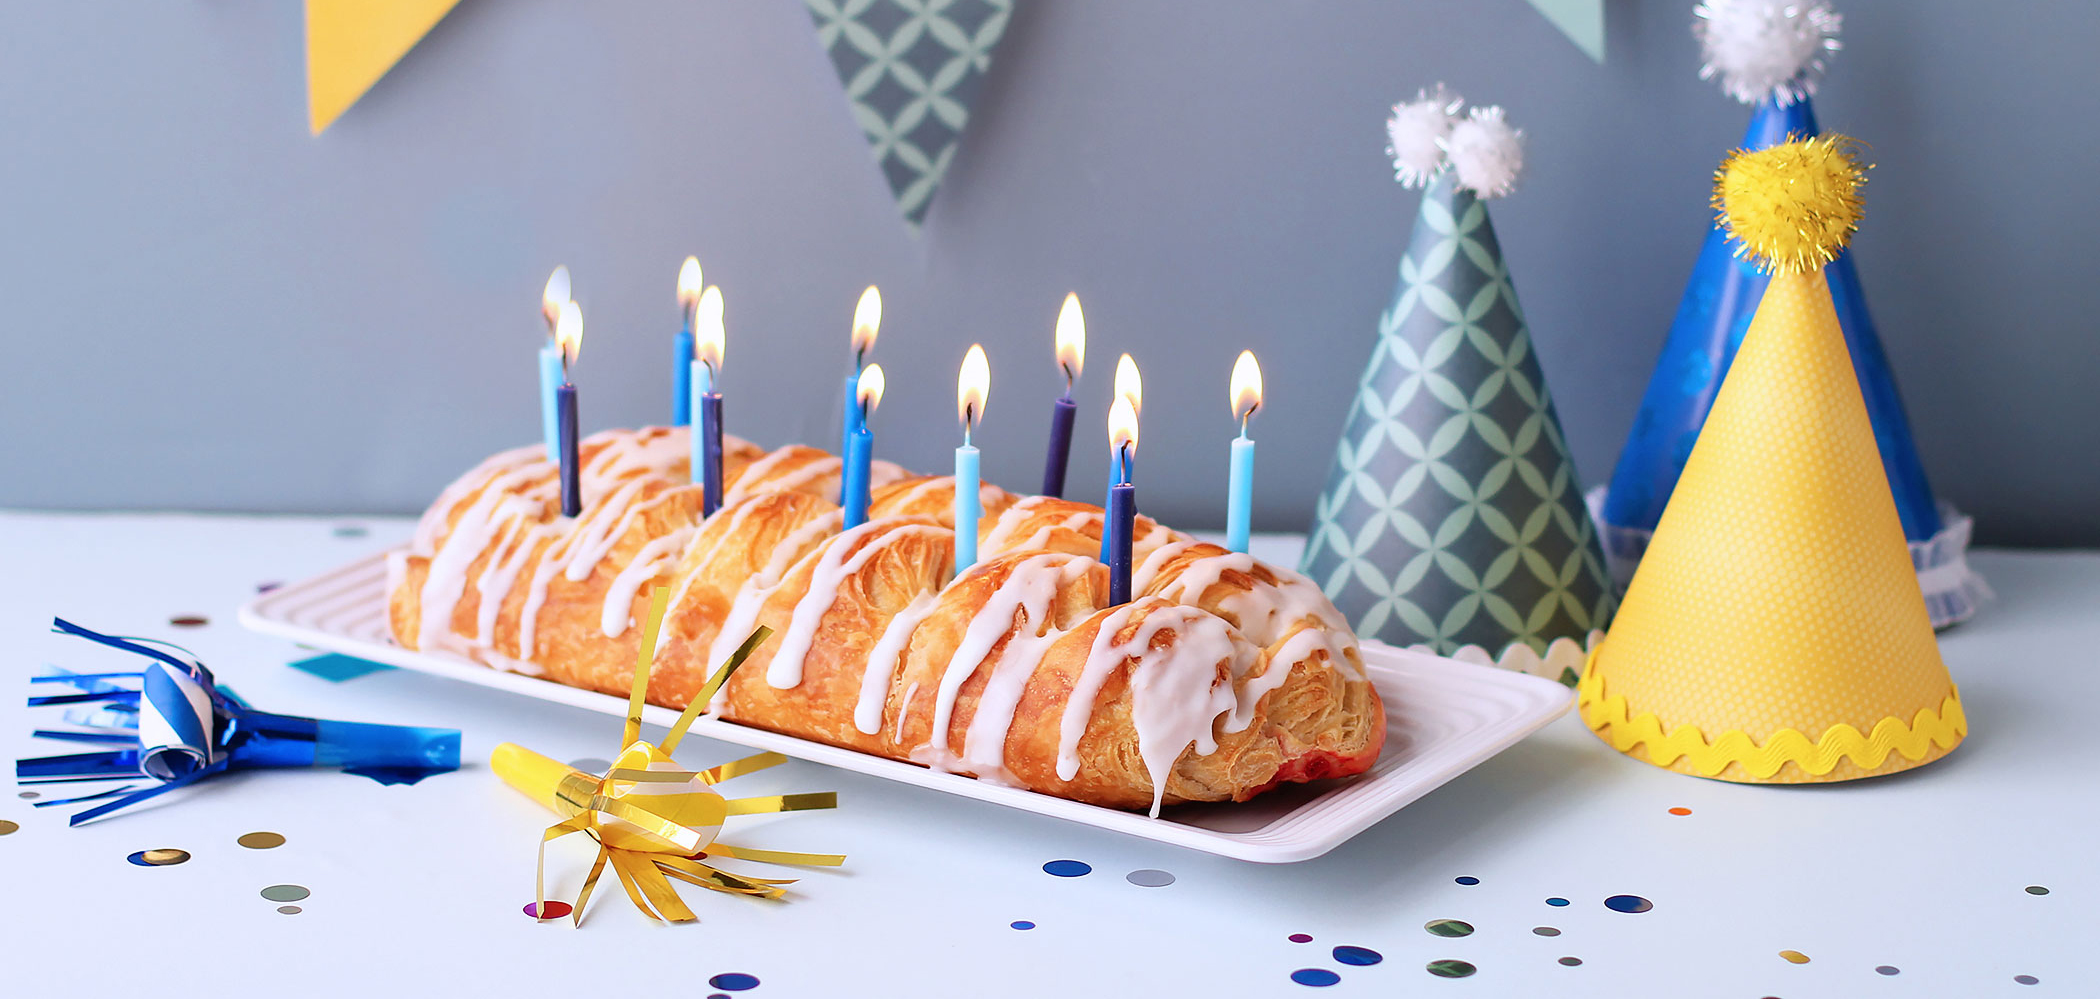 Butter Braid Pastry with candles in it surrounded by birthday hats, confetti, and noise makers.